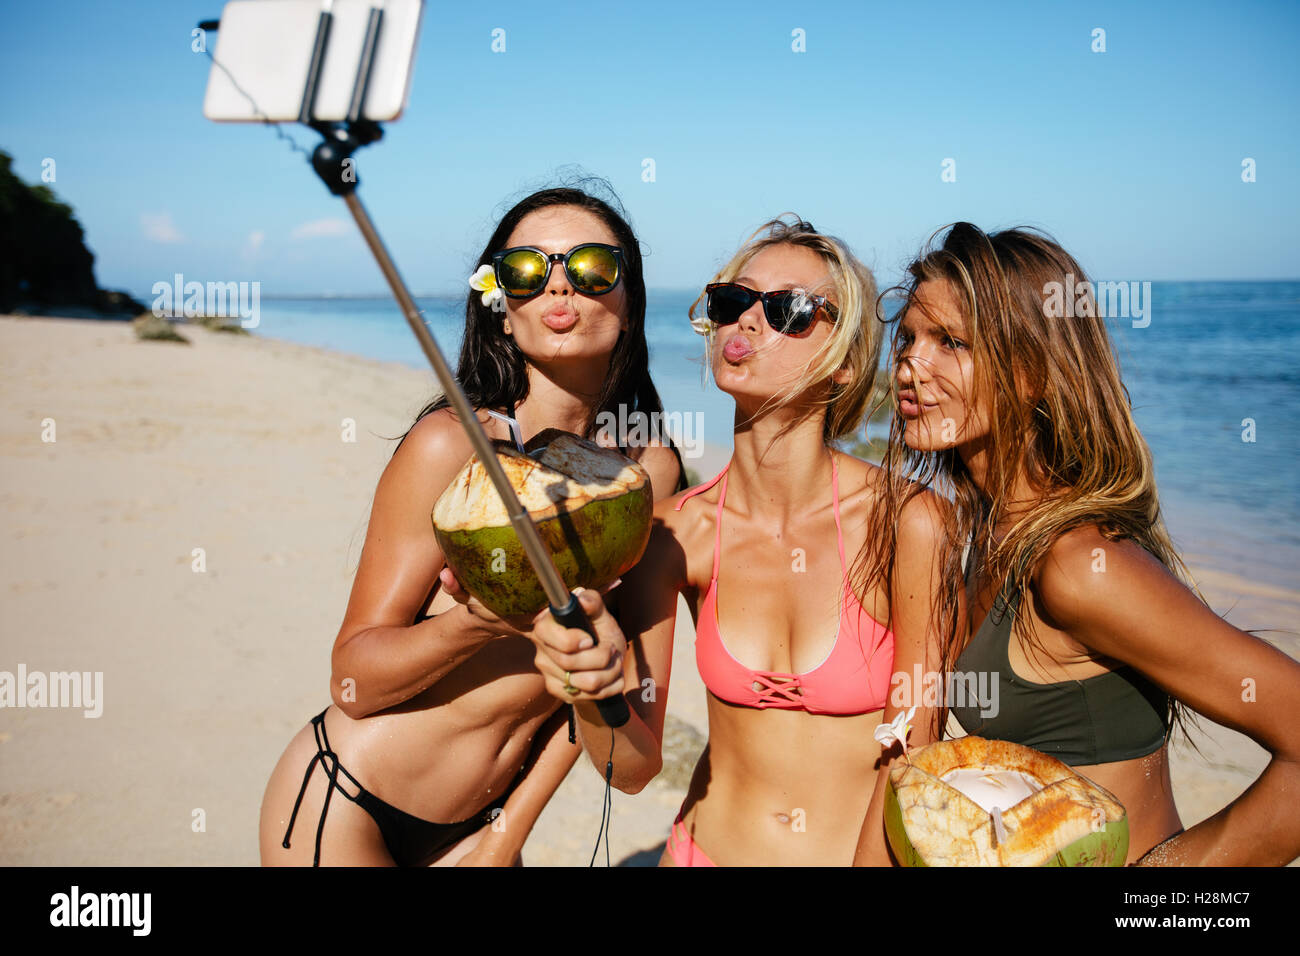 Three young women in swimsuit on the beach enjoying holidays and taking self portrait selfie stick. Group of female friends with Stock Photo